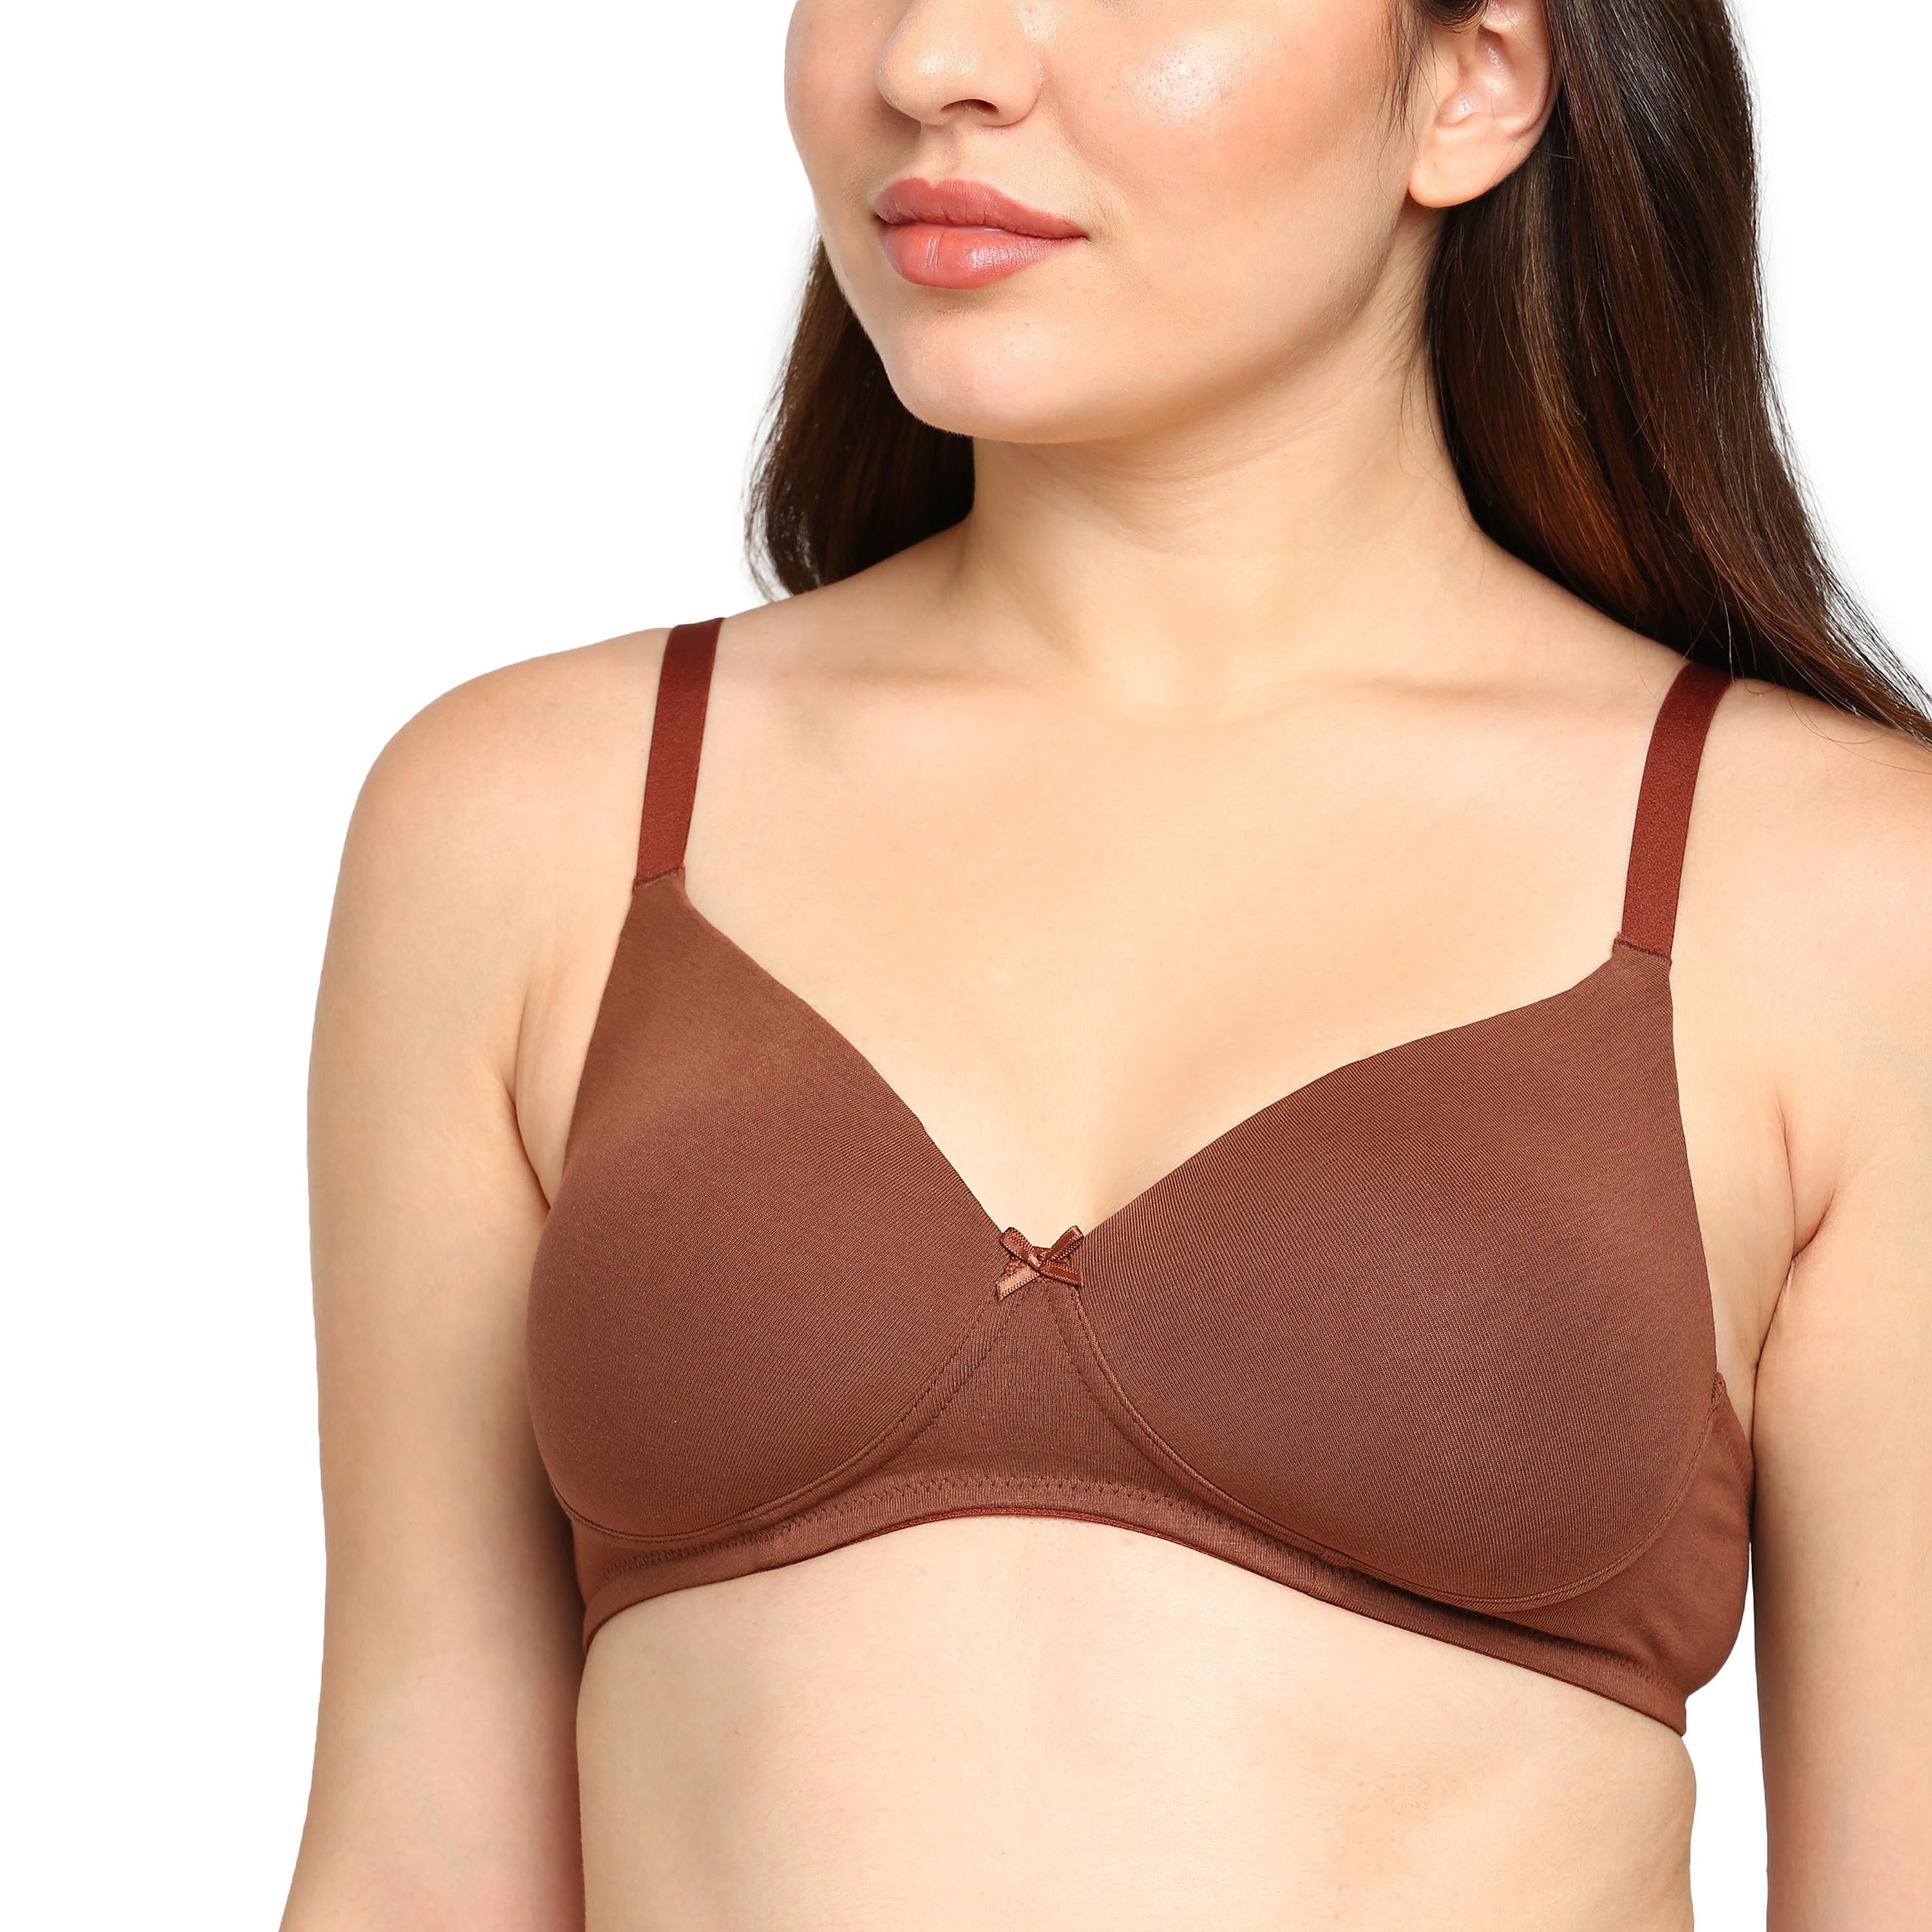 blossom-beloved pad-brown3-Lightly Padded Collection-padded